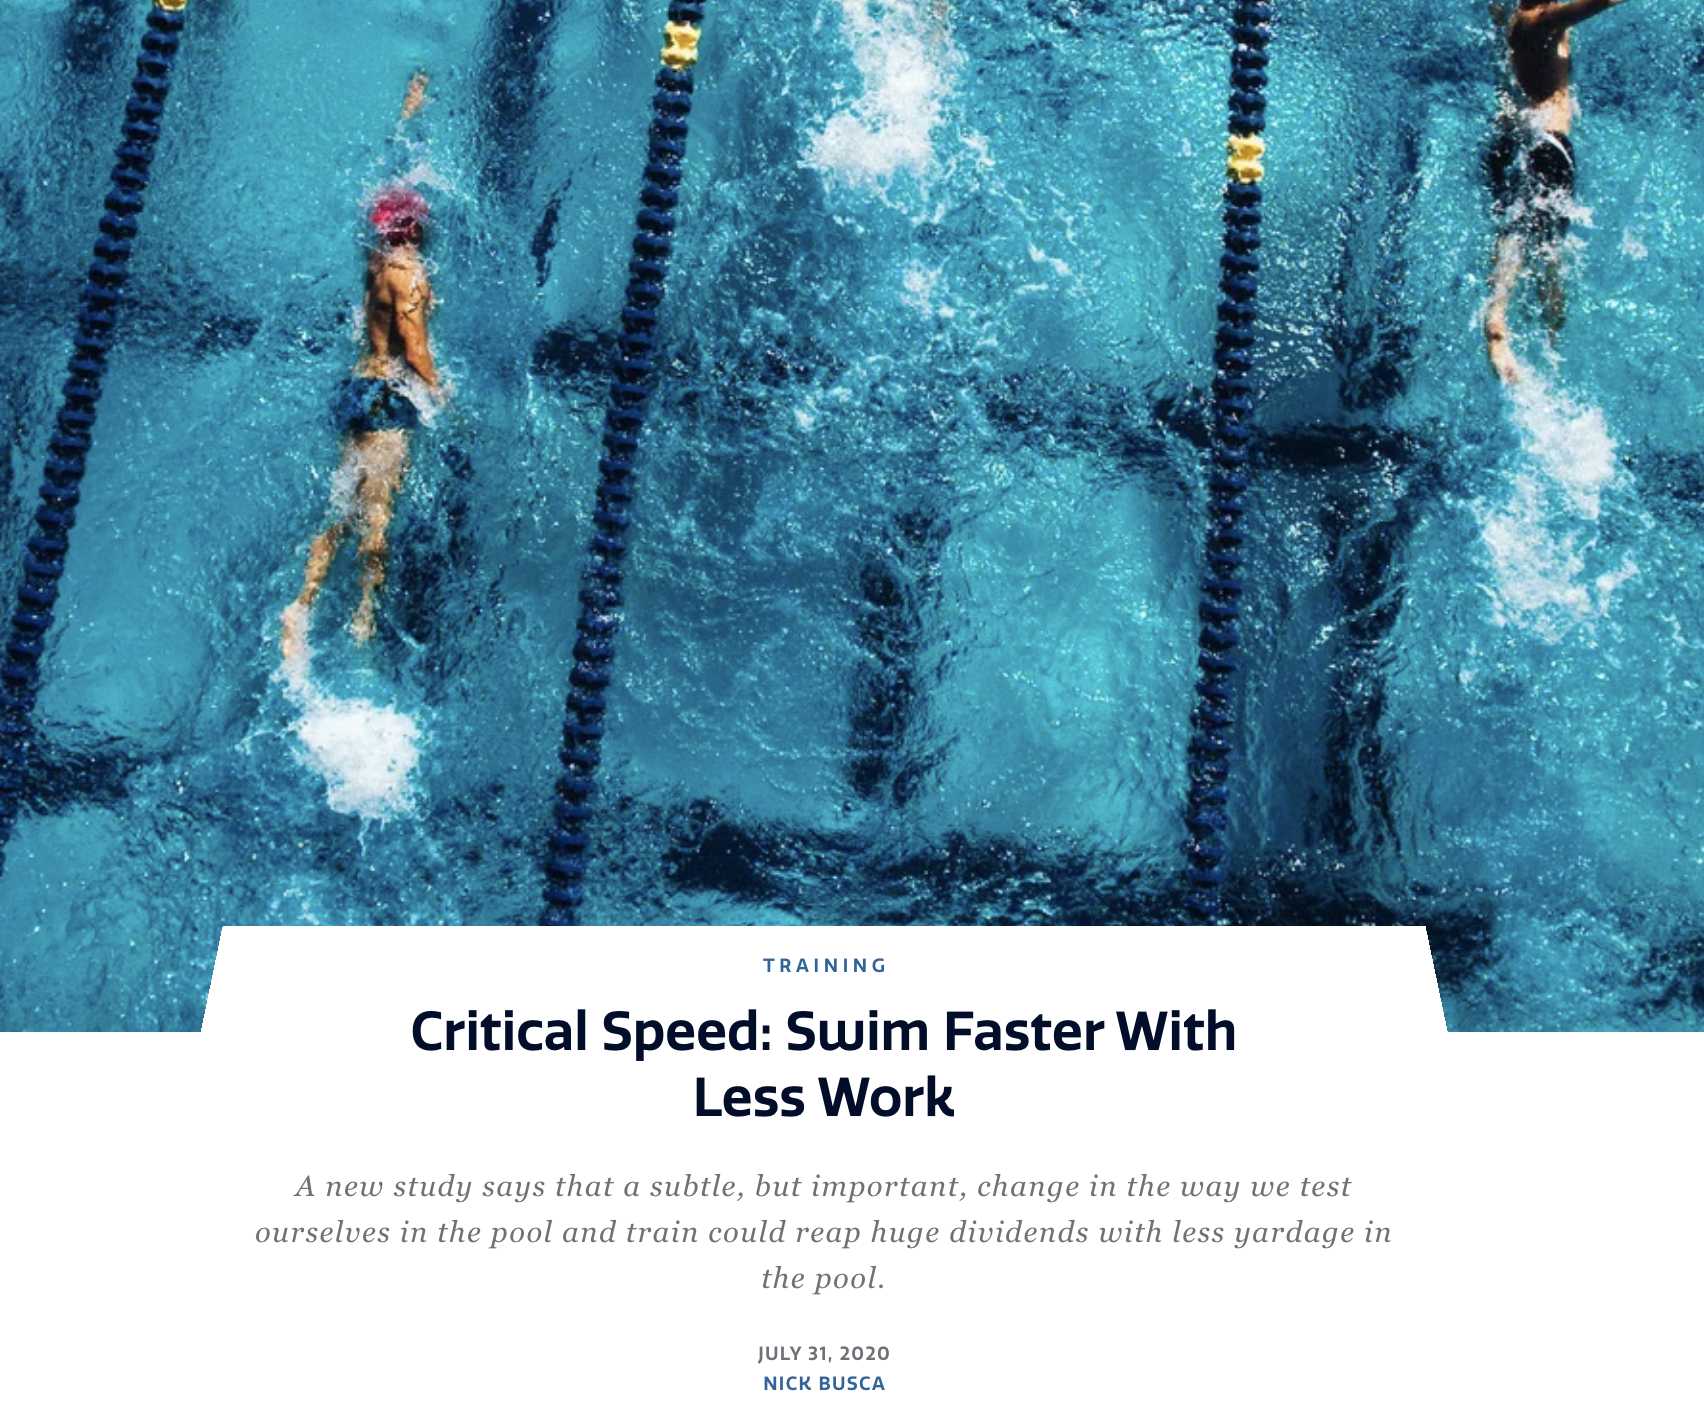 Critical Speed: Swim Faster With Less Work